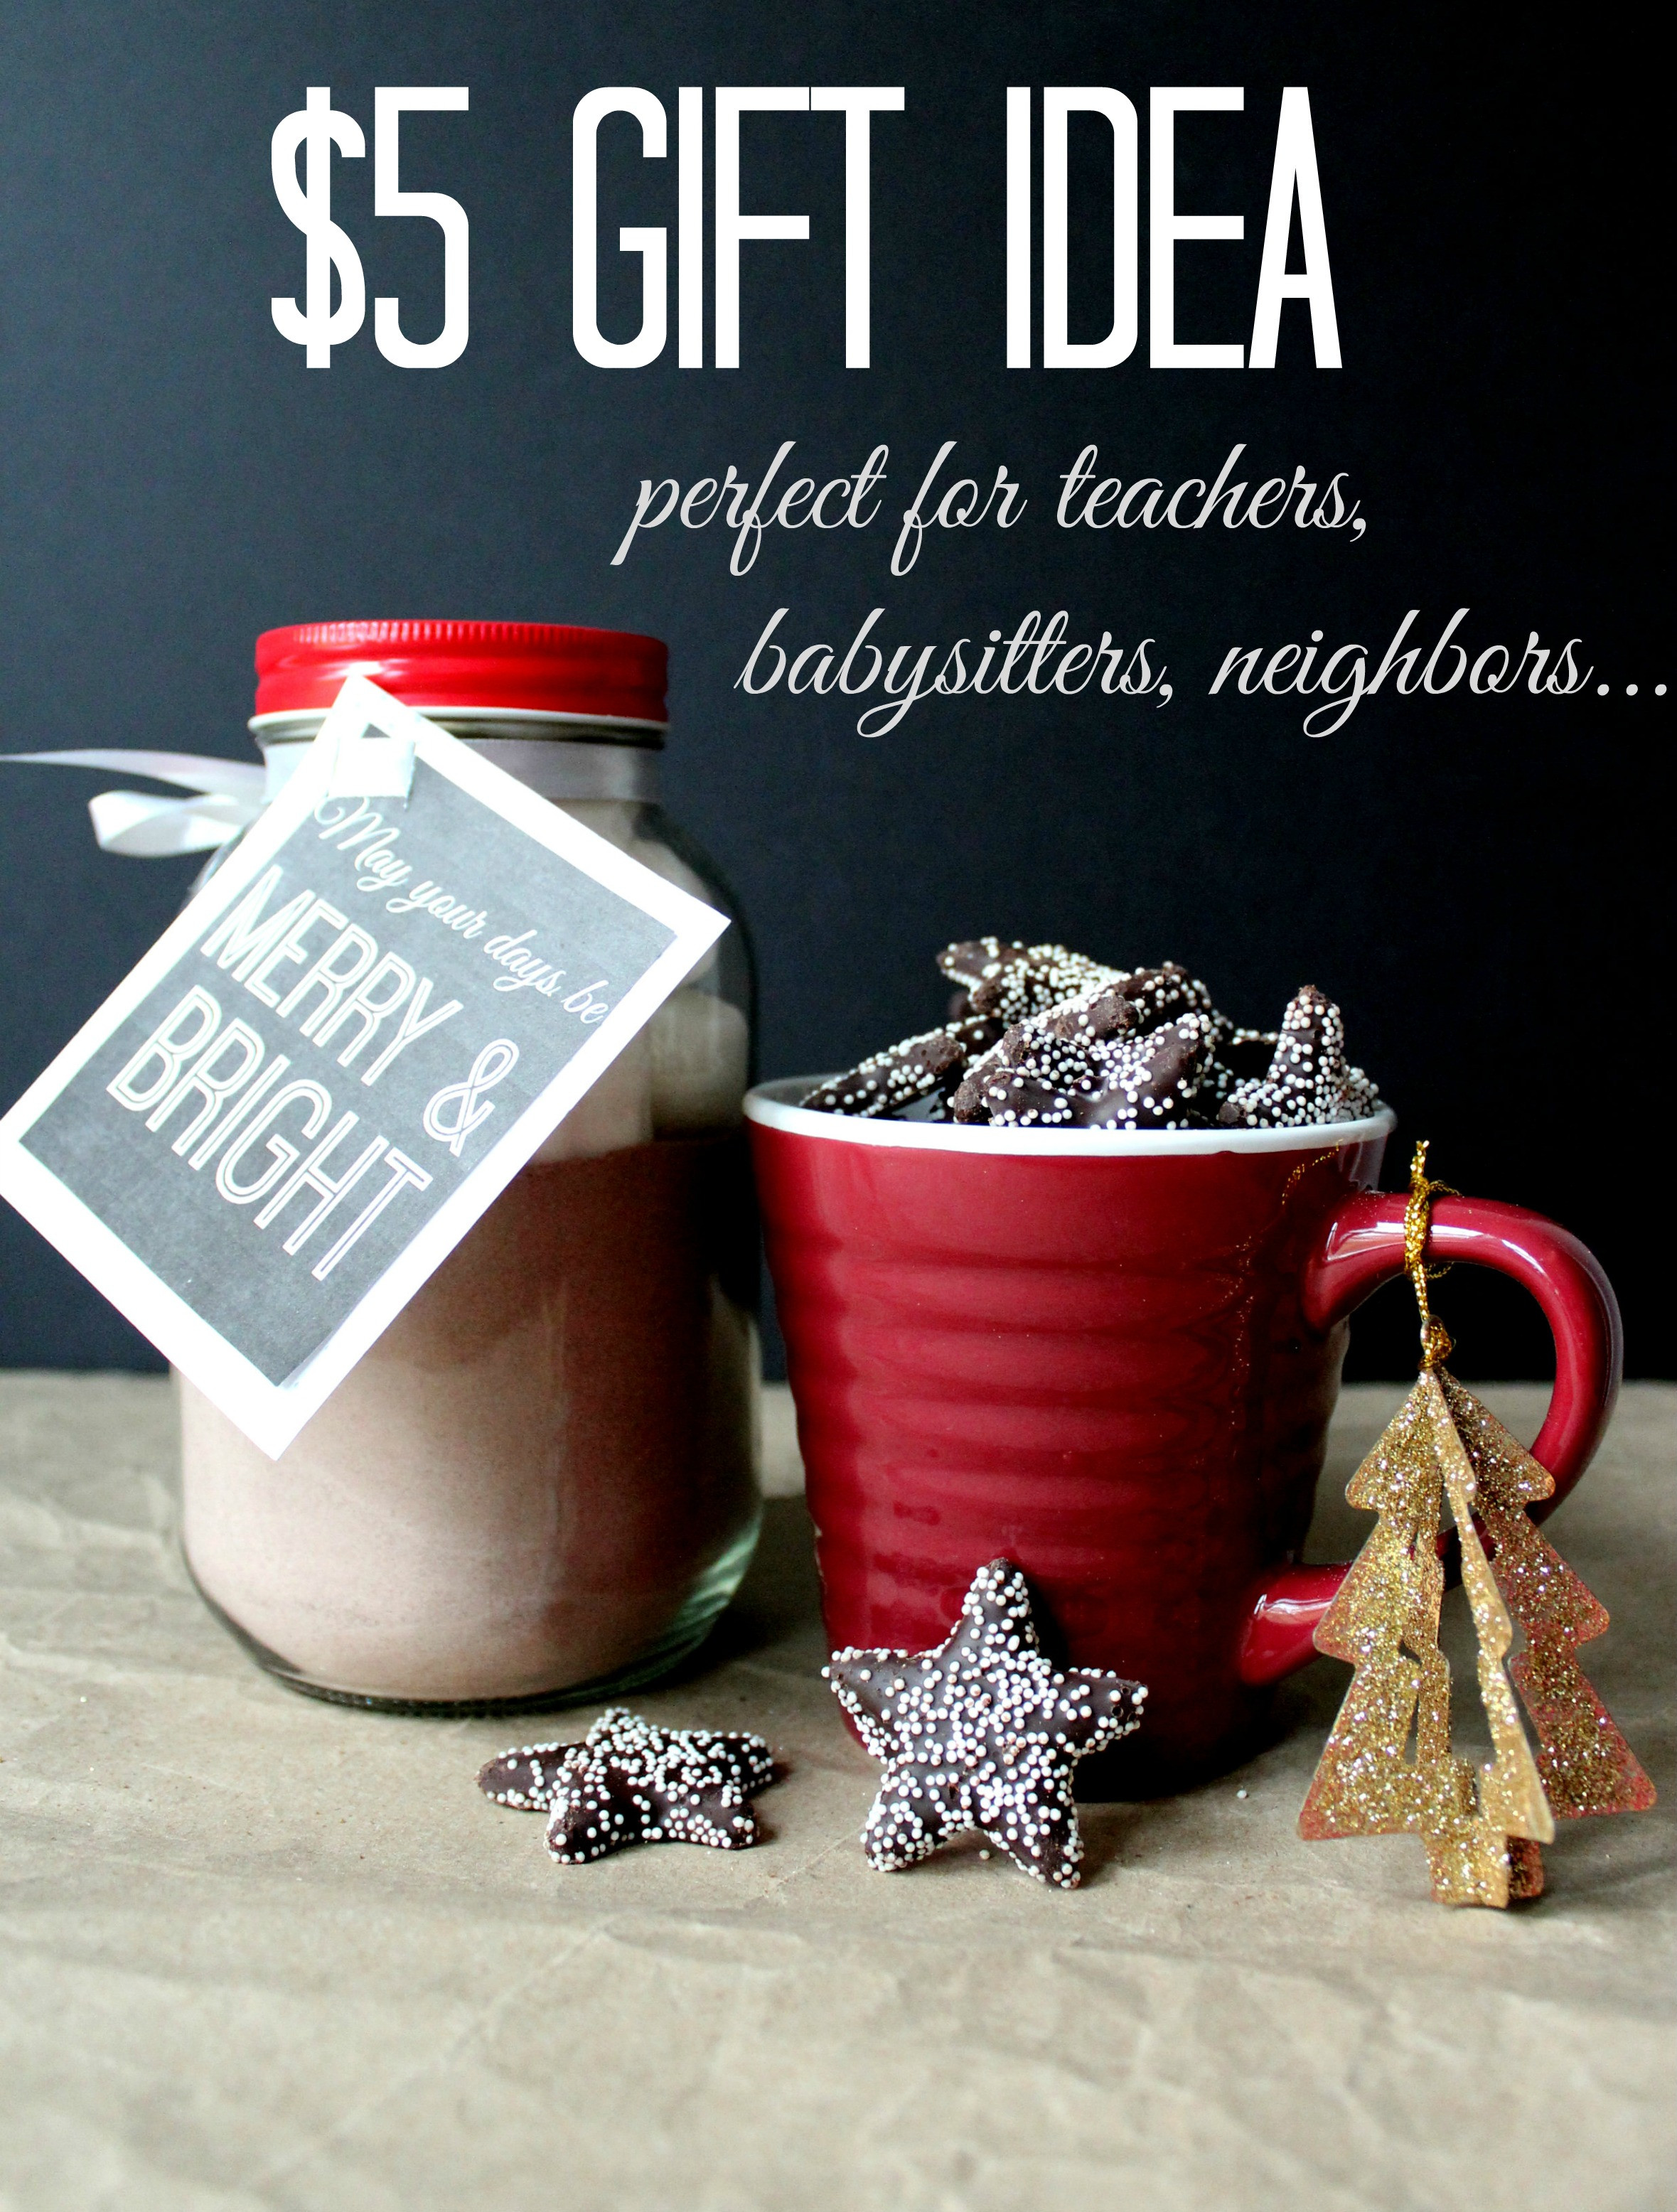 Christmas Gift Ideas For Coworkers Under $5
 Simple Holiday $5 t idea Christinas Adventures